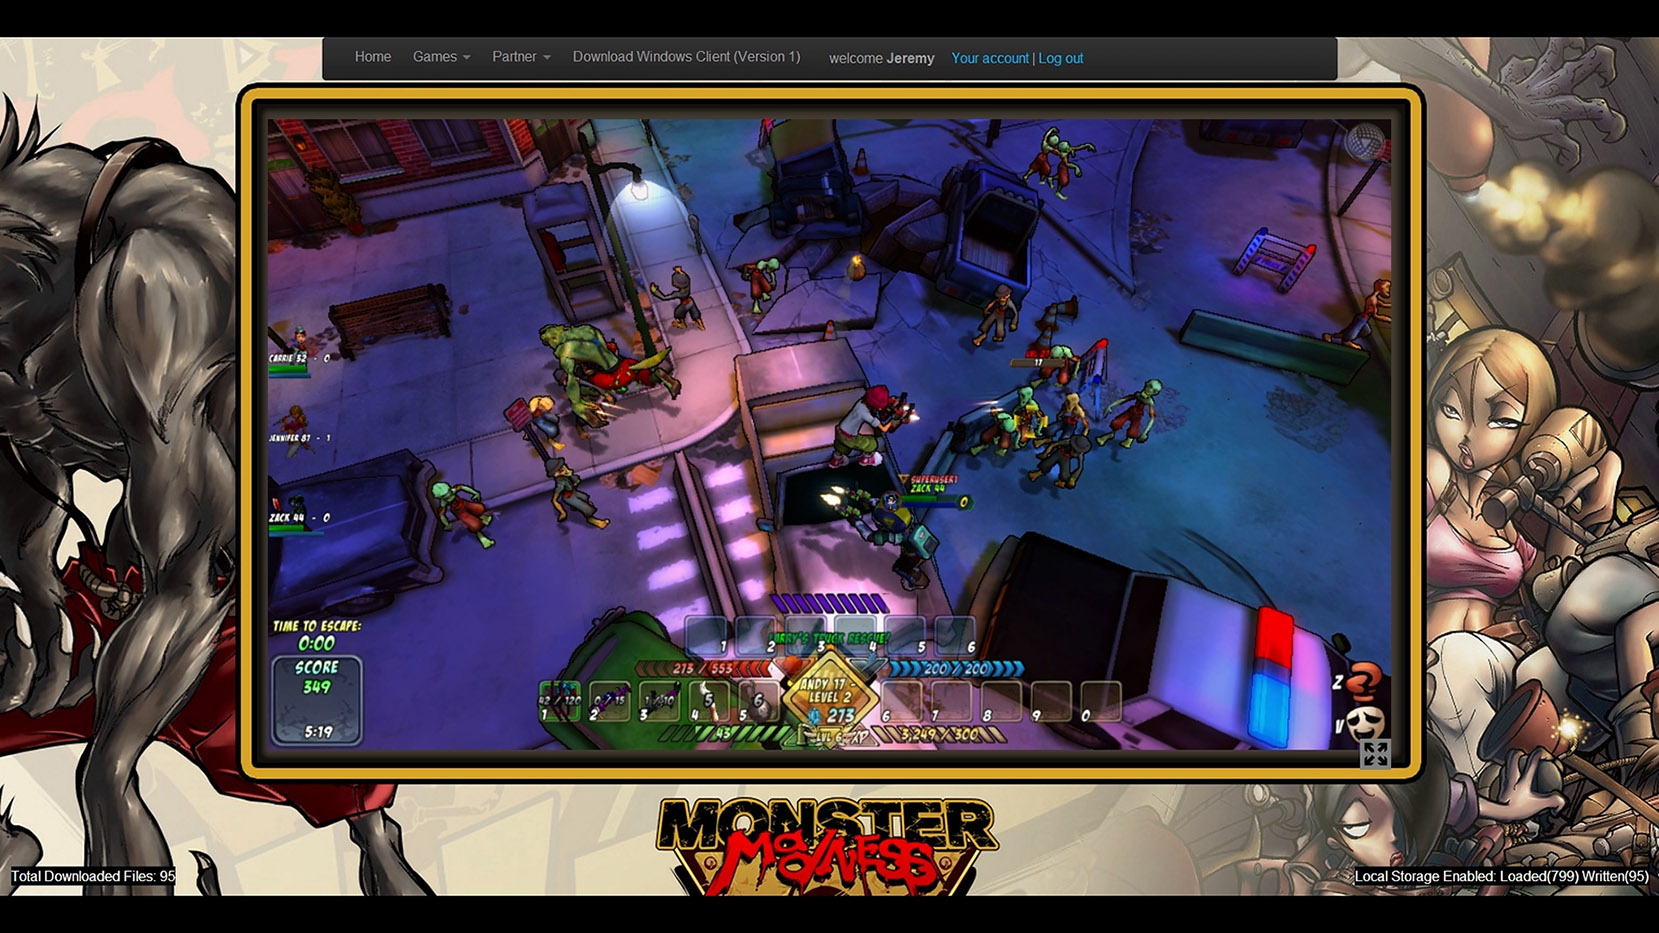 Unreal Engine 3-Powered “Monster Madness Online” Demo Released for the Web